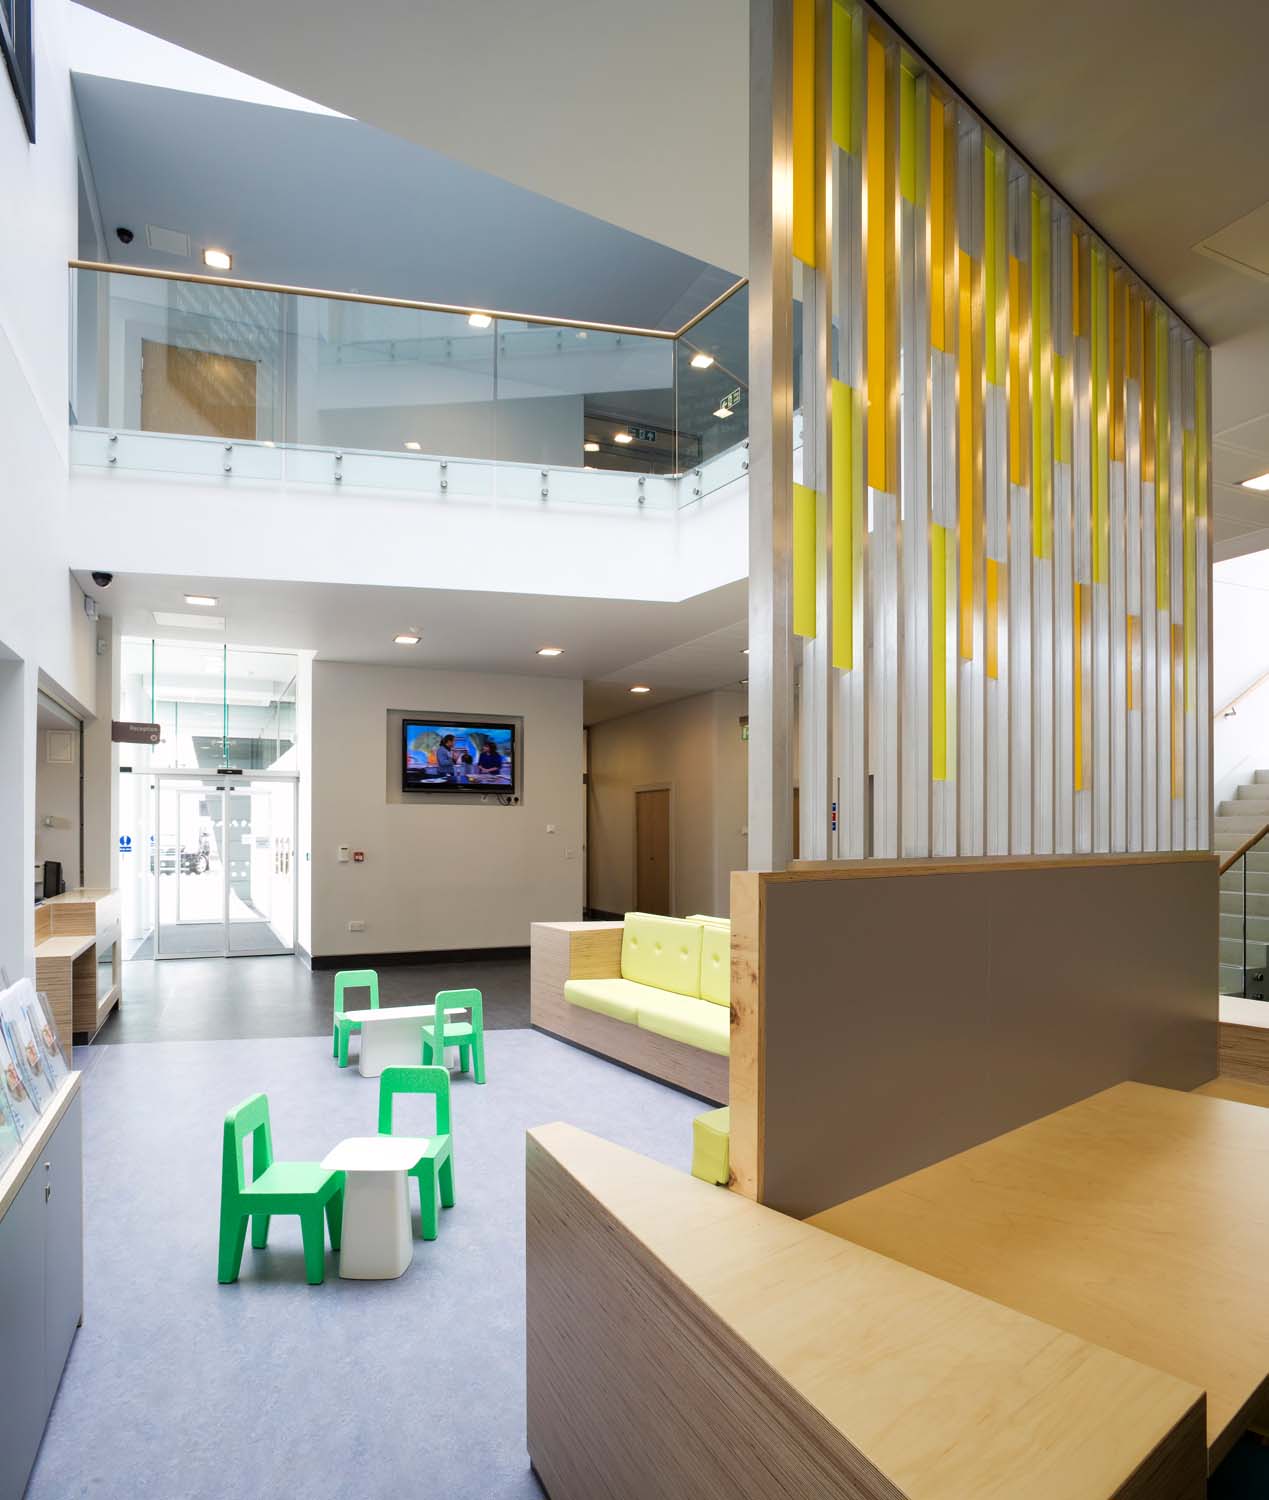  The ground floor reception area in the atrium space of West Centre Glasgow features yellow padded seating and kids' chairs and tables.